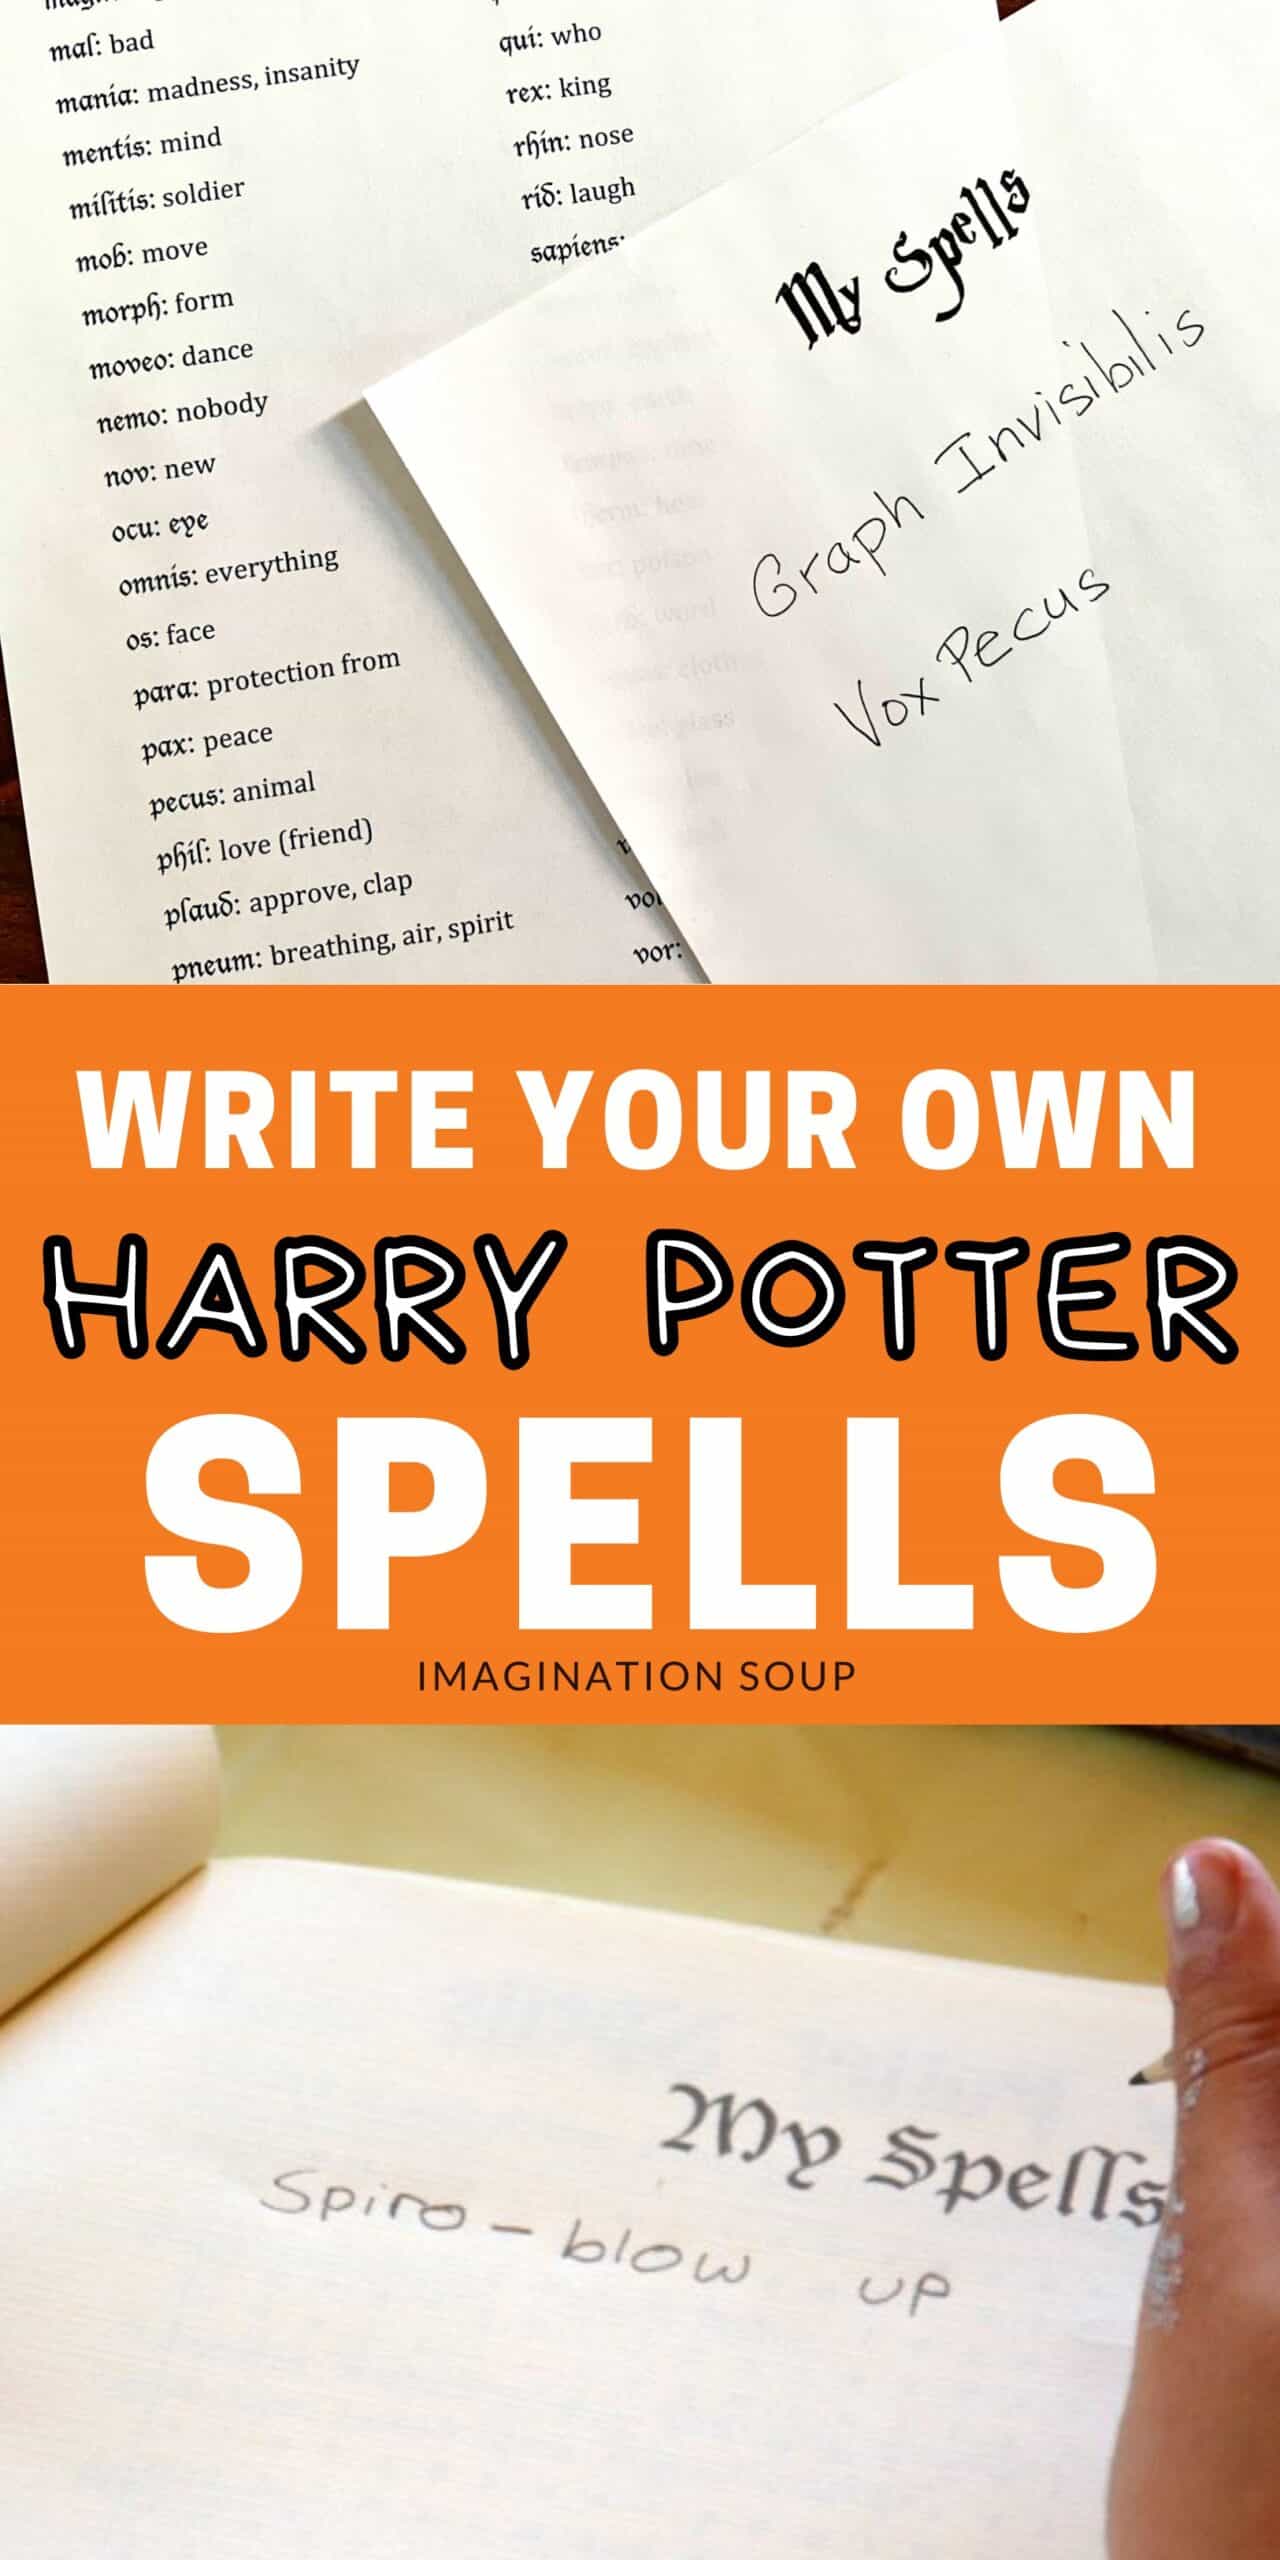 Write Your Own Latin Based Harry Potter Spells Imagination Soup